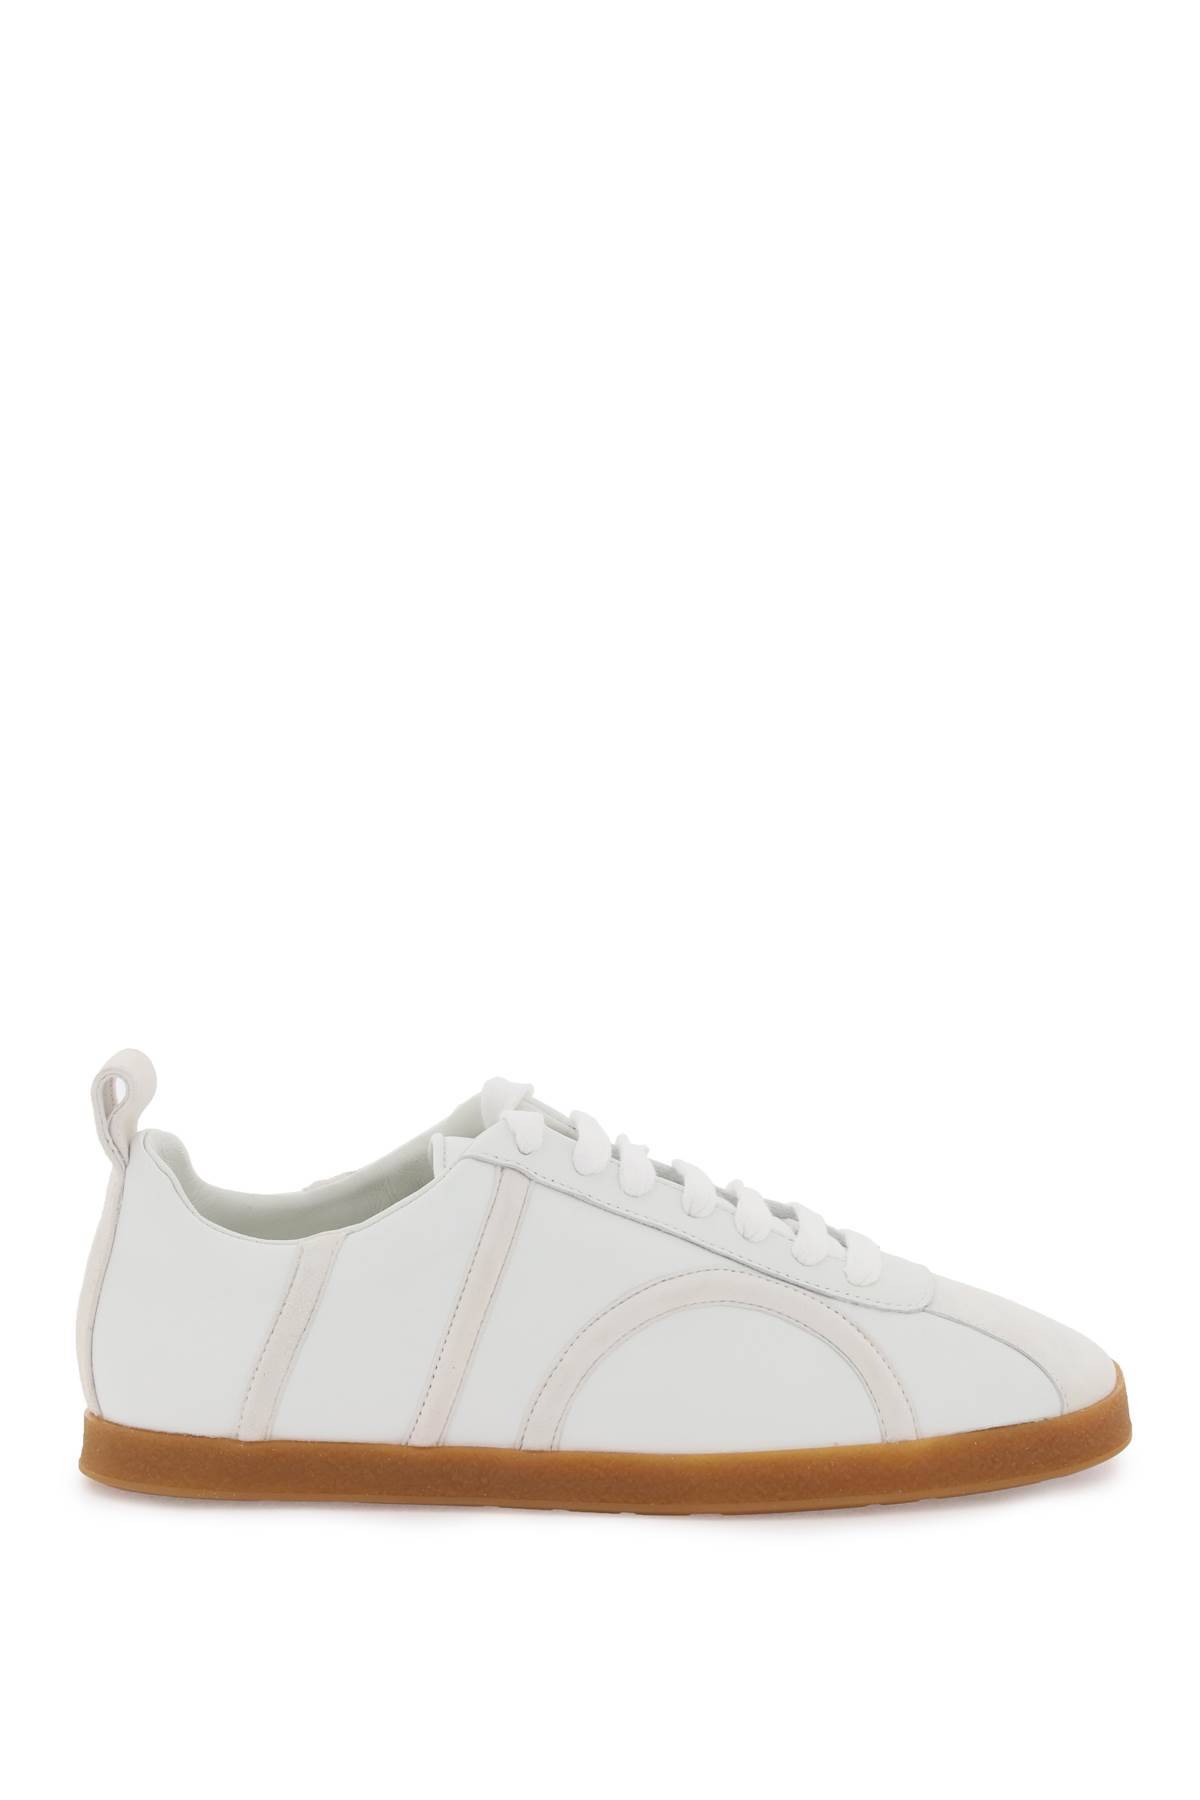 Toteme TOTEME leather sneakers